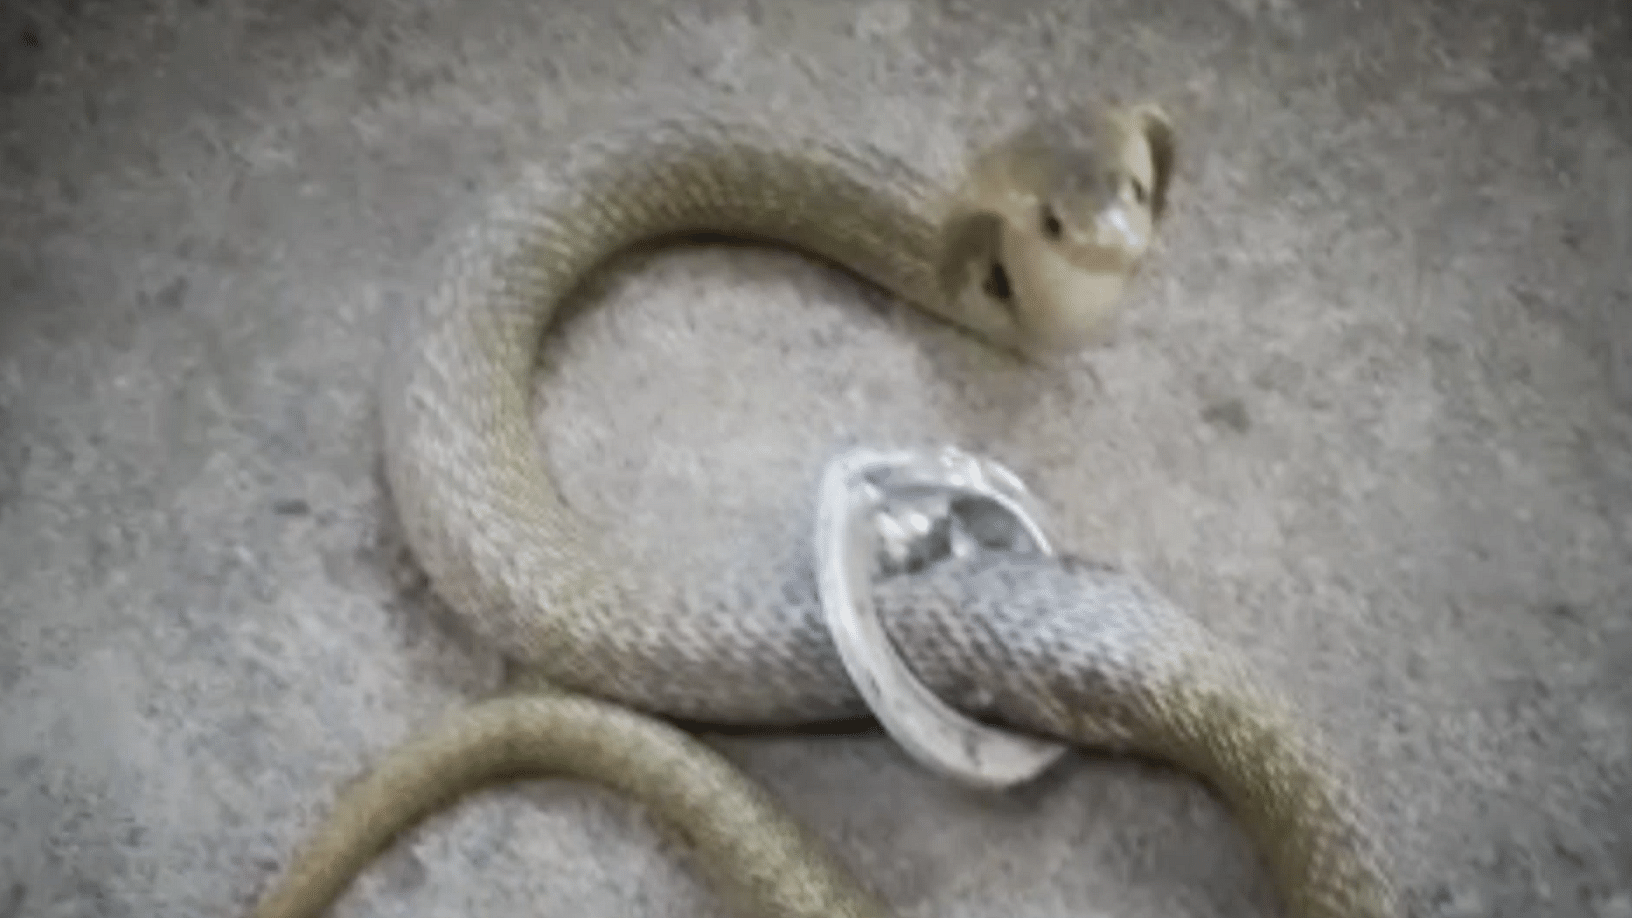 The snake got stuck in the steel mesh while escaping from the drainage outlet